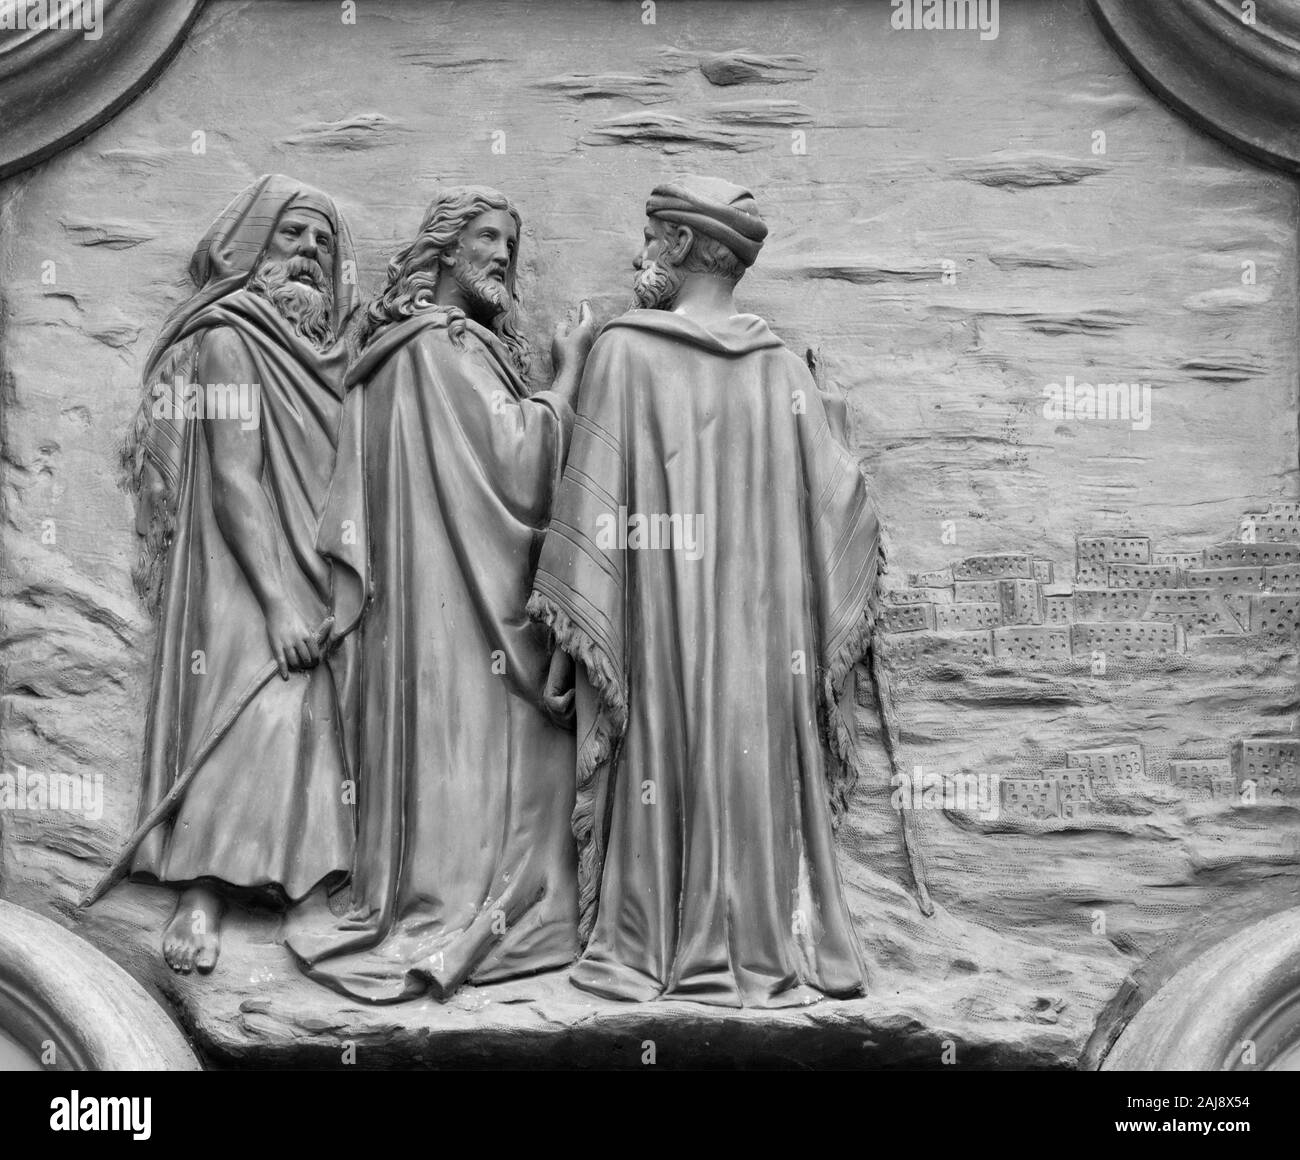 ACIREALE, ITALY - APRIL 11, 2018: Bronze relief of Jesus and the apostles over the Jerusalem from the gate of Basilica Collegiata di San Sebastiano. Stock Photo